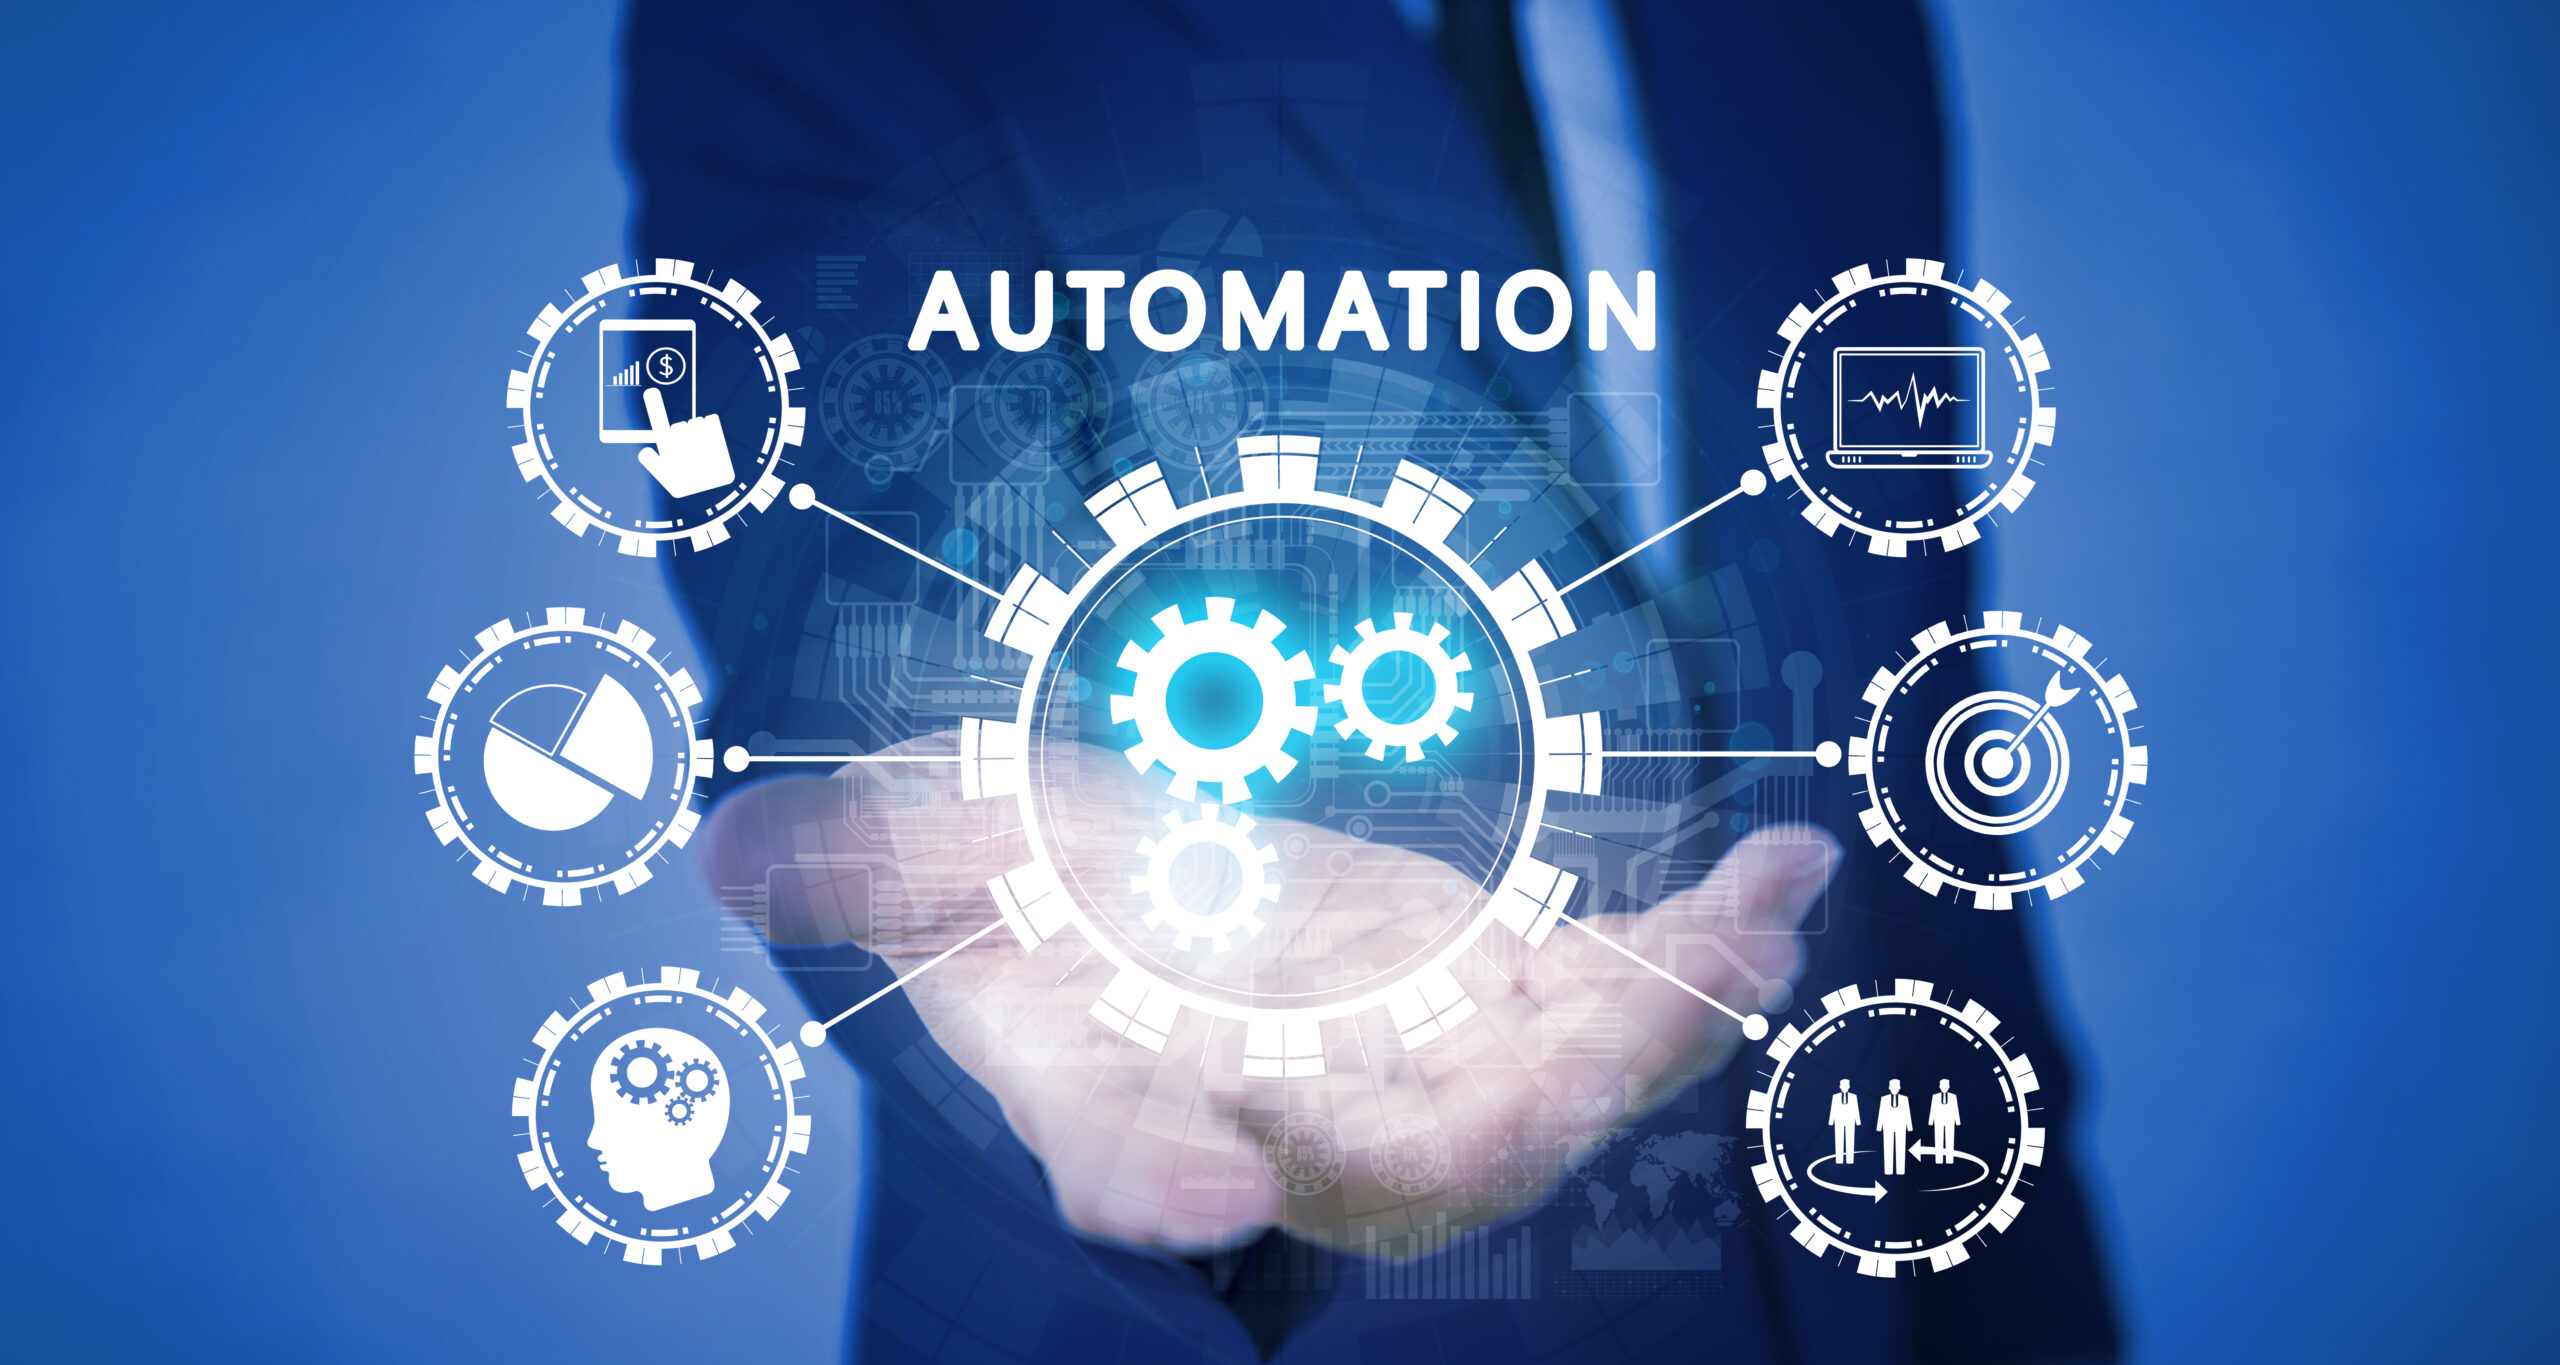 Implementing Automation Technologies in Smart Factory